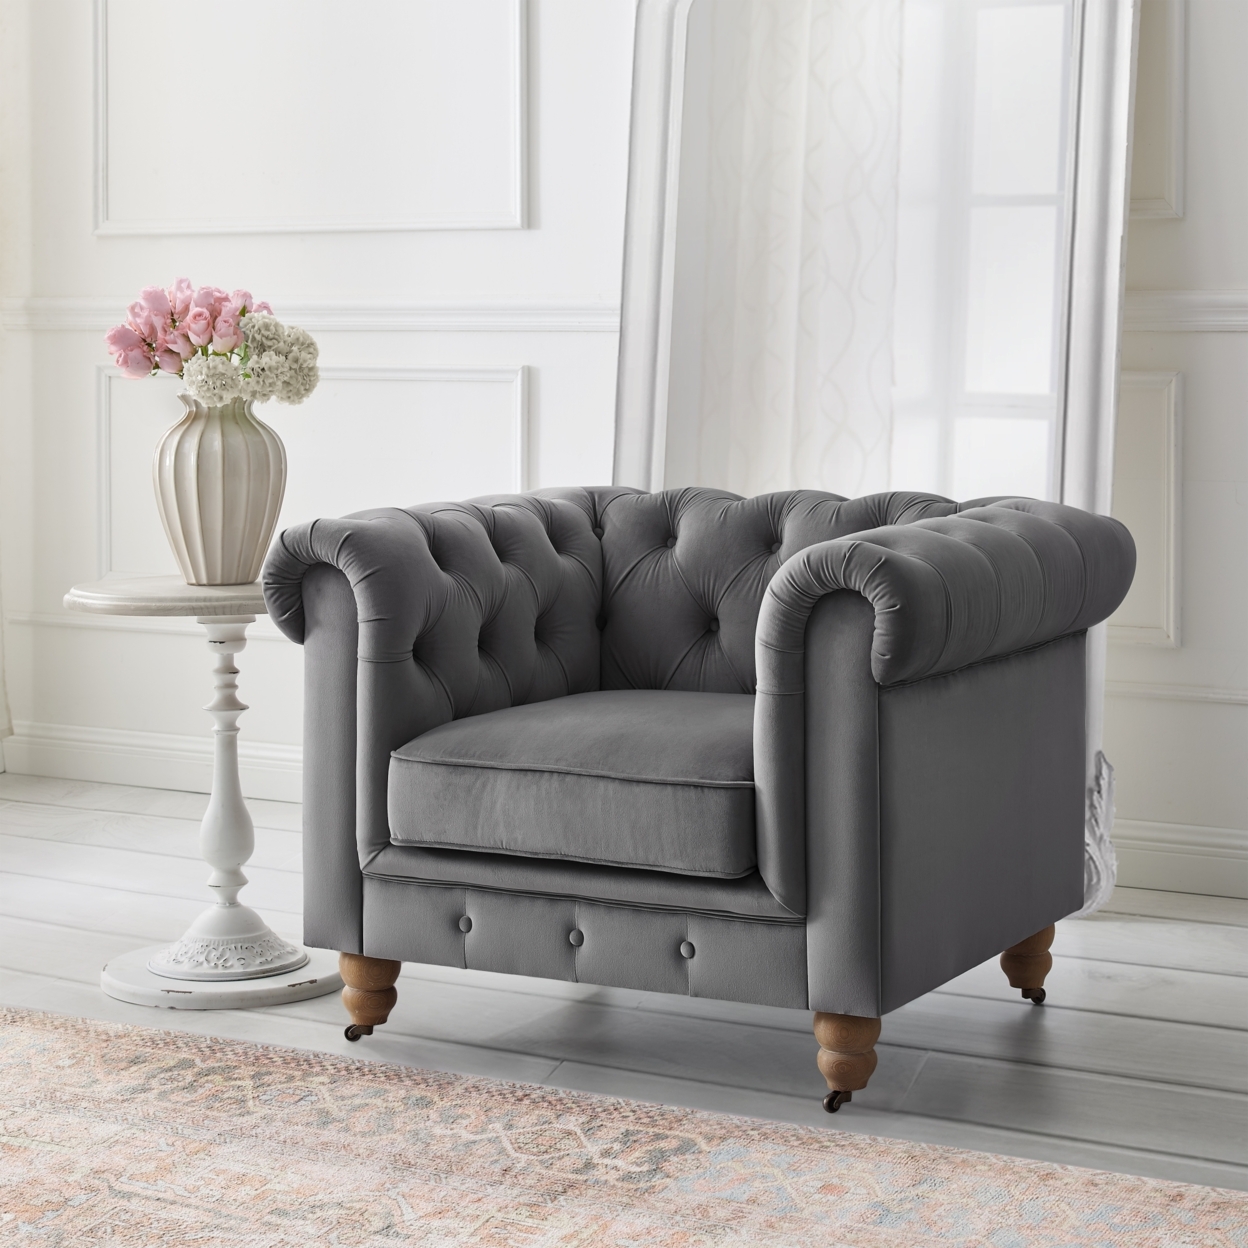 Kaleigh Club Chair-Button Tufted-Rolled Arm, Sinuous Springs - Dark Grey